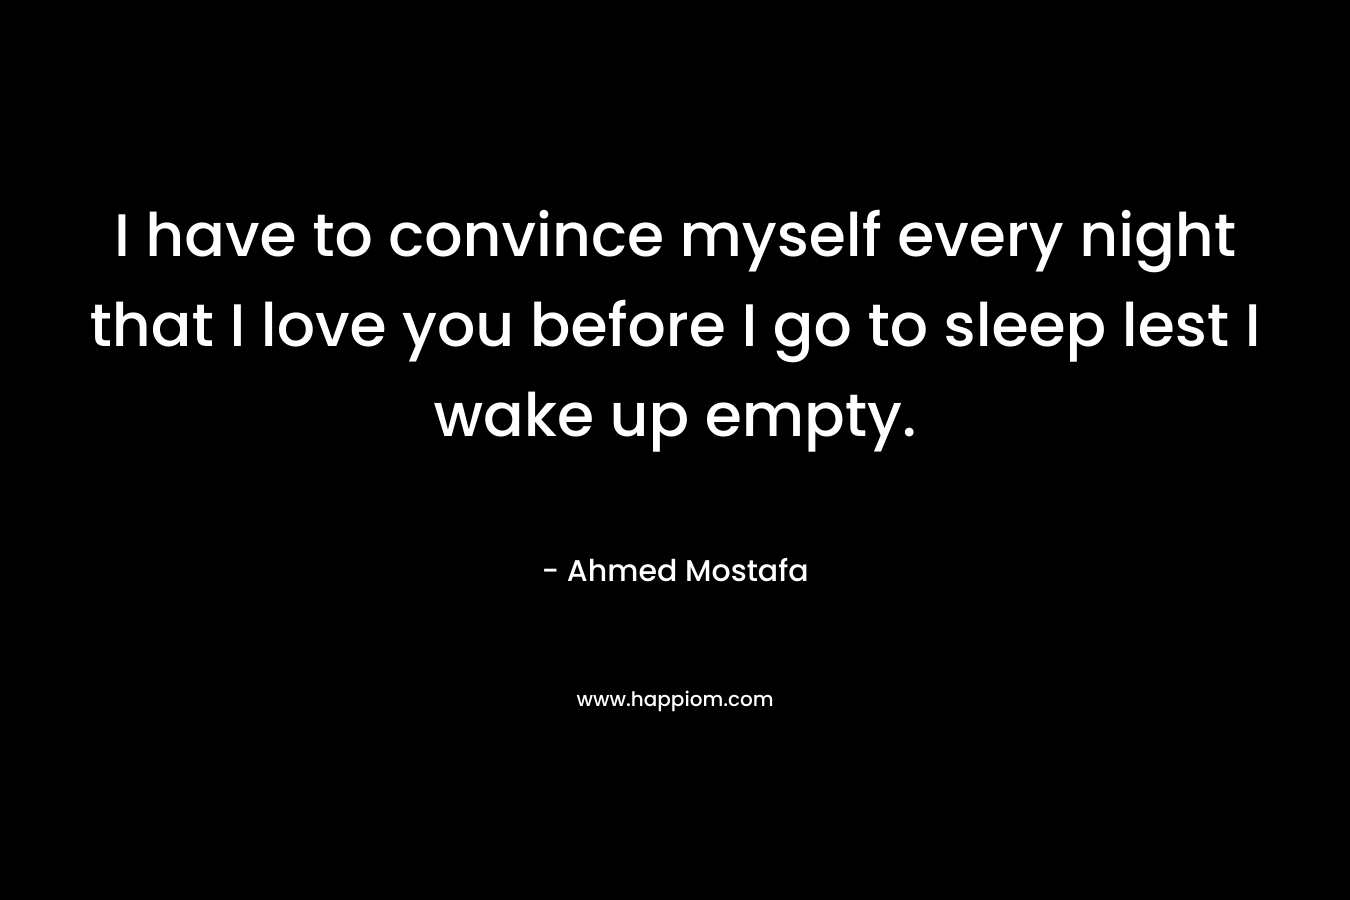 I have to convince myself every night that I love you before I go to sleep lest I wake up empty.